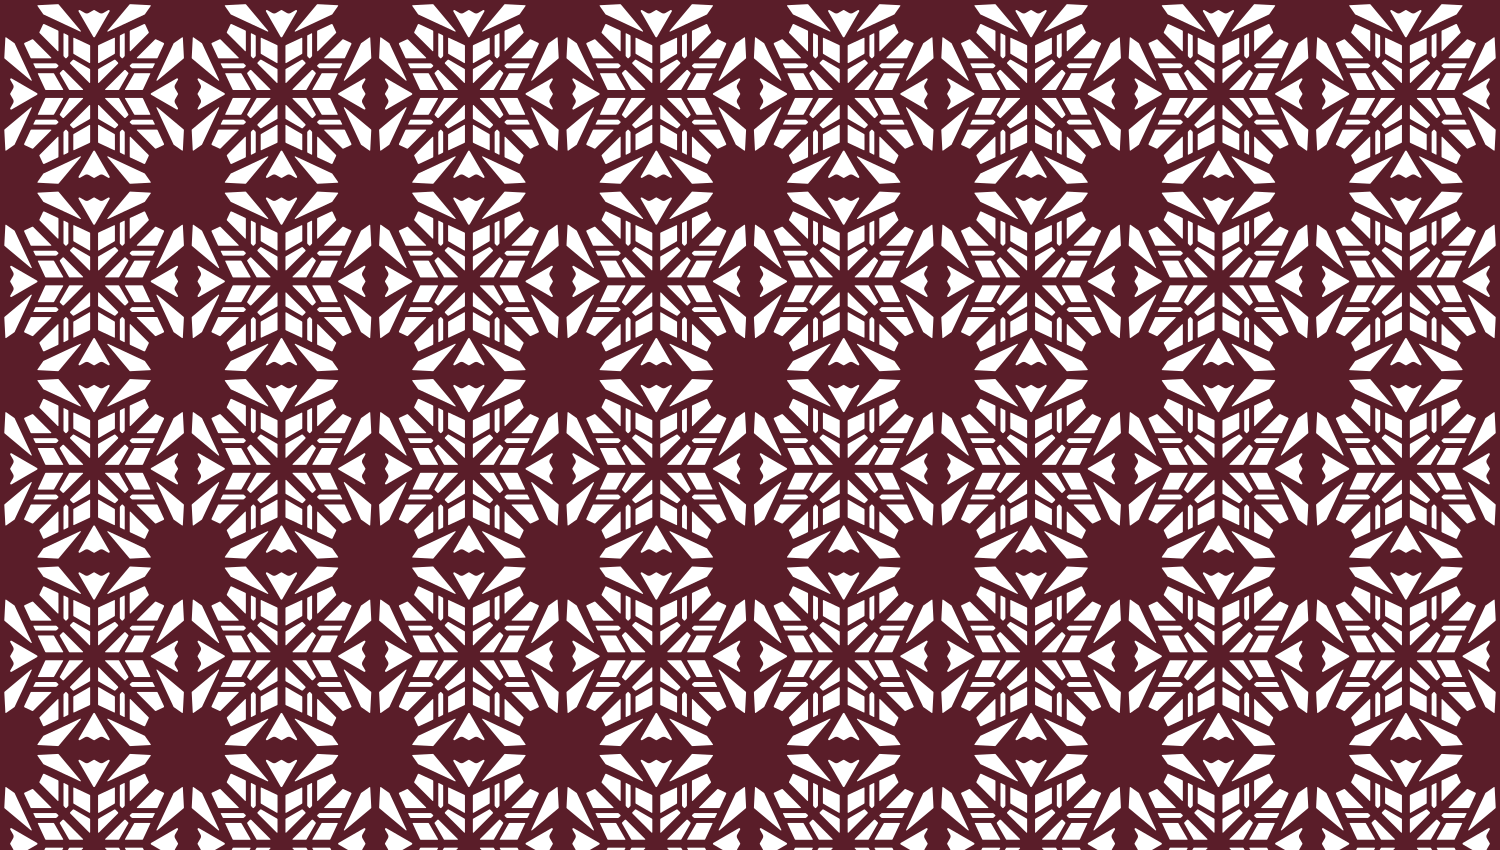 Parasoleil™ Tapestry© pattern displayed with a burgundy color overlay